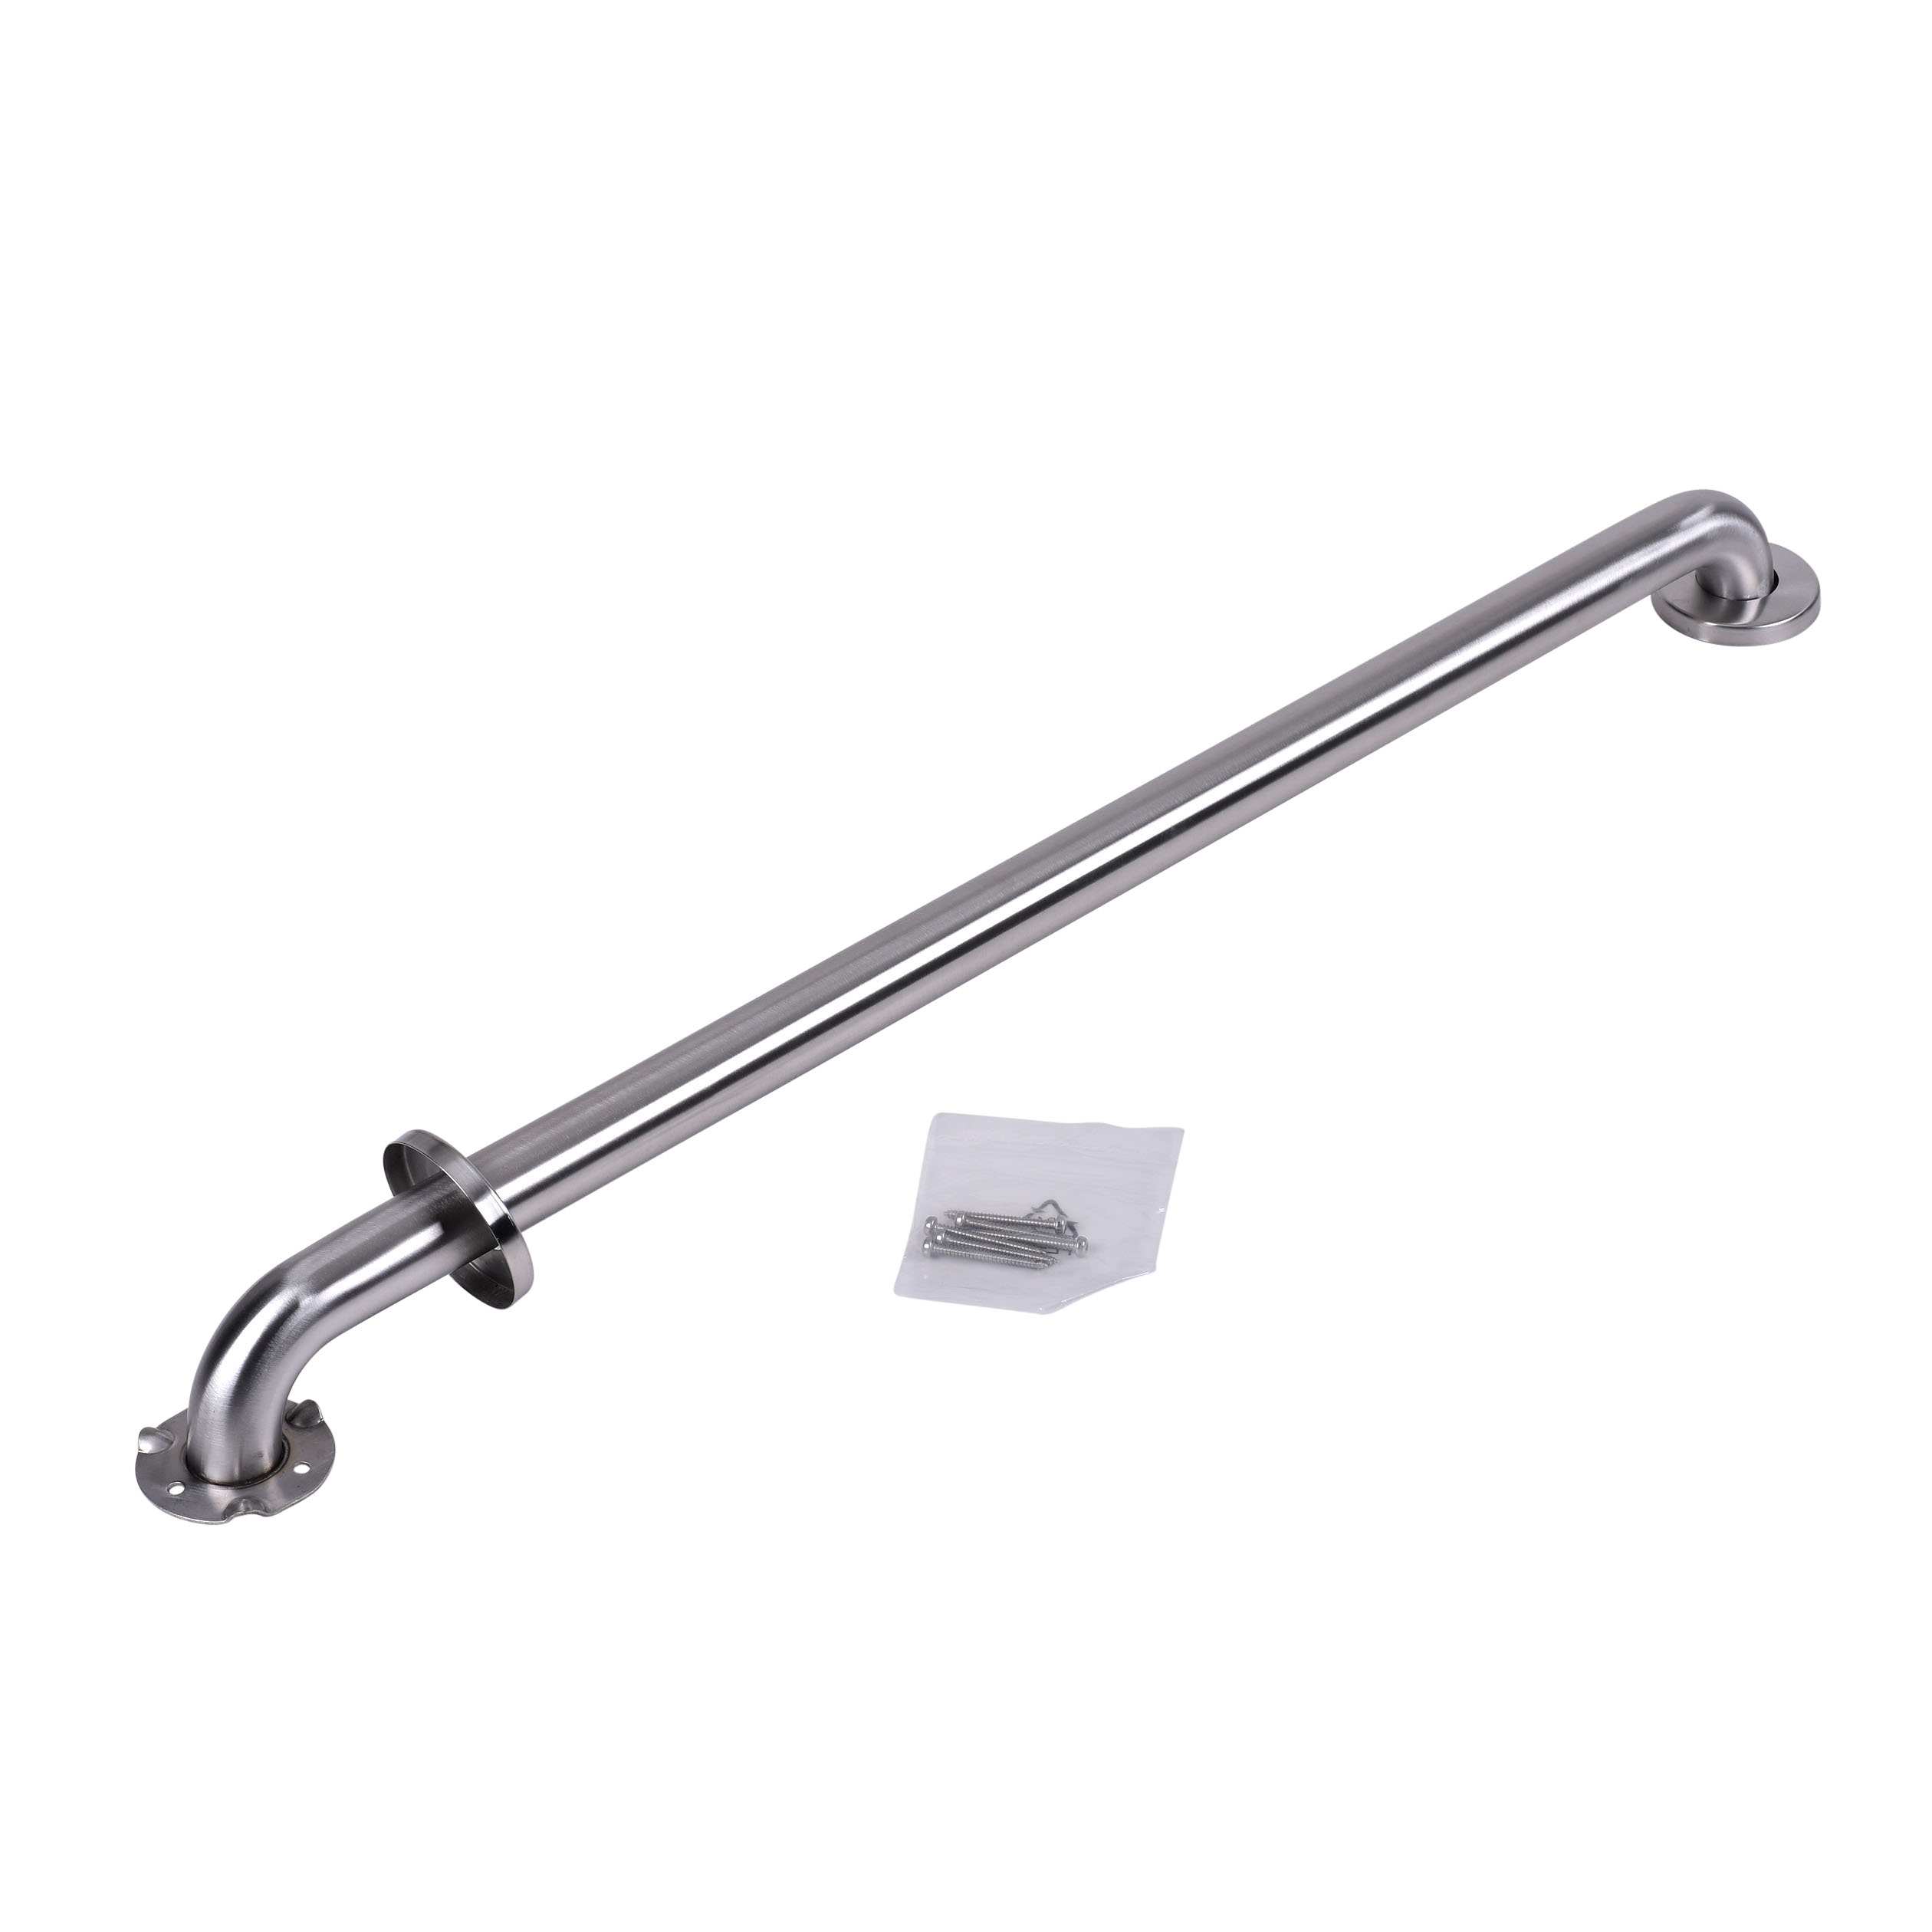 Dearborn Stainless Steel, Grab Bar 1-1/2" X 36" With Concealed Flange 21953